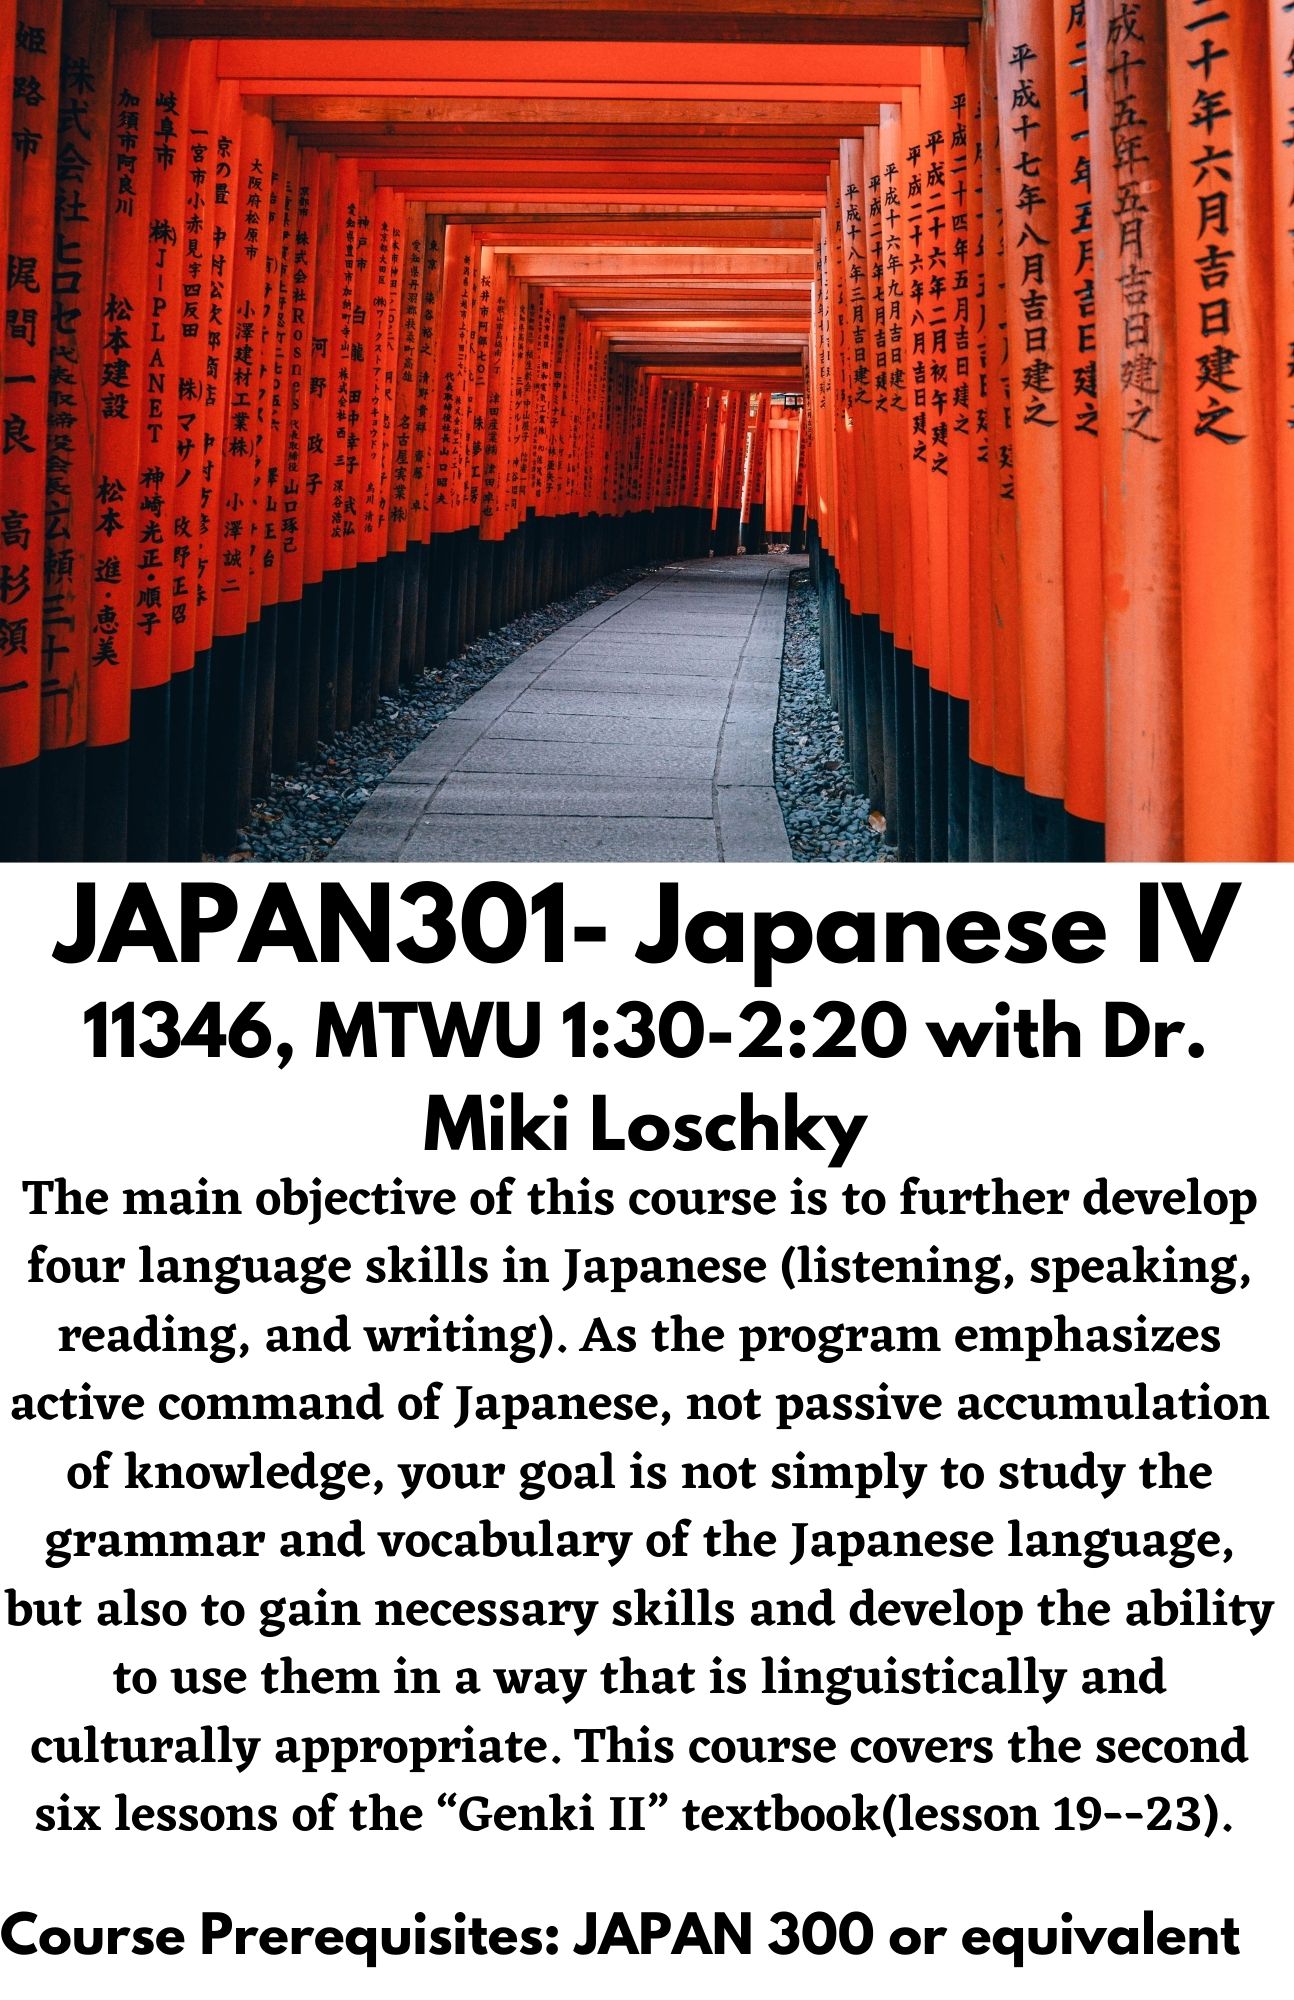 JAPAN301- Japanese IV. 11346, MTWU 1:30-2:20 with Dr. Miki Loschky. The main objective of this course is to further develop four language skills in Japanese (listening, speaking, reading, and writing). As the program emphasizes active command of Japanese, not passive accumulation of knowledge, your goal is not simply to study the grammar and vocabulary of the Japanese language, but also to gain necessary skills and develop the ability to use them in a way that is linguistically and culturally appropriate. This course covers the second six lessons of the “Genki II” textbook(lesson 19--23).   Course Prerequisites: JAPAN 300 or equivalent 